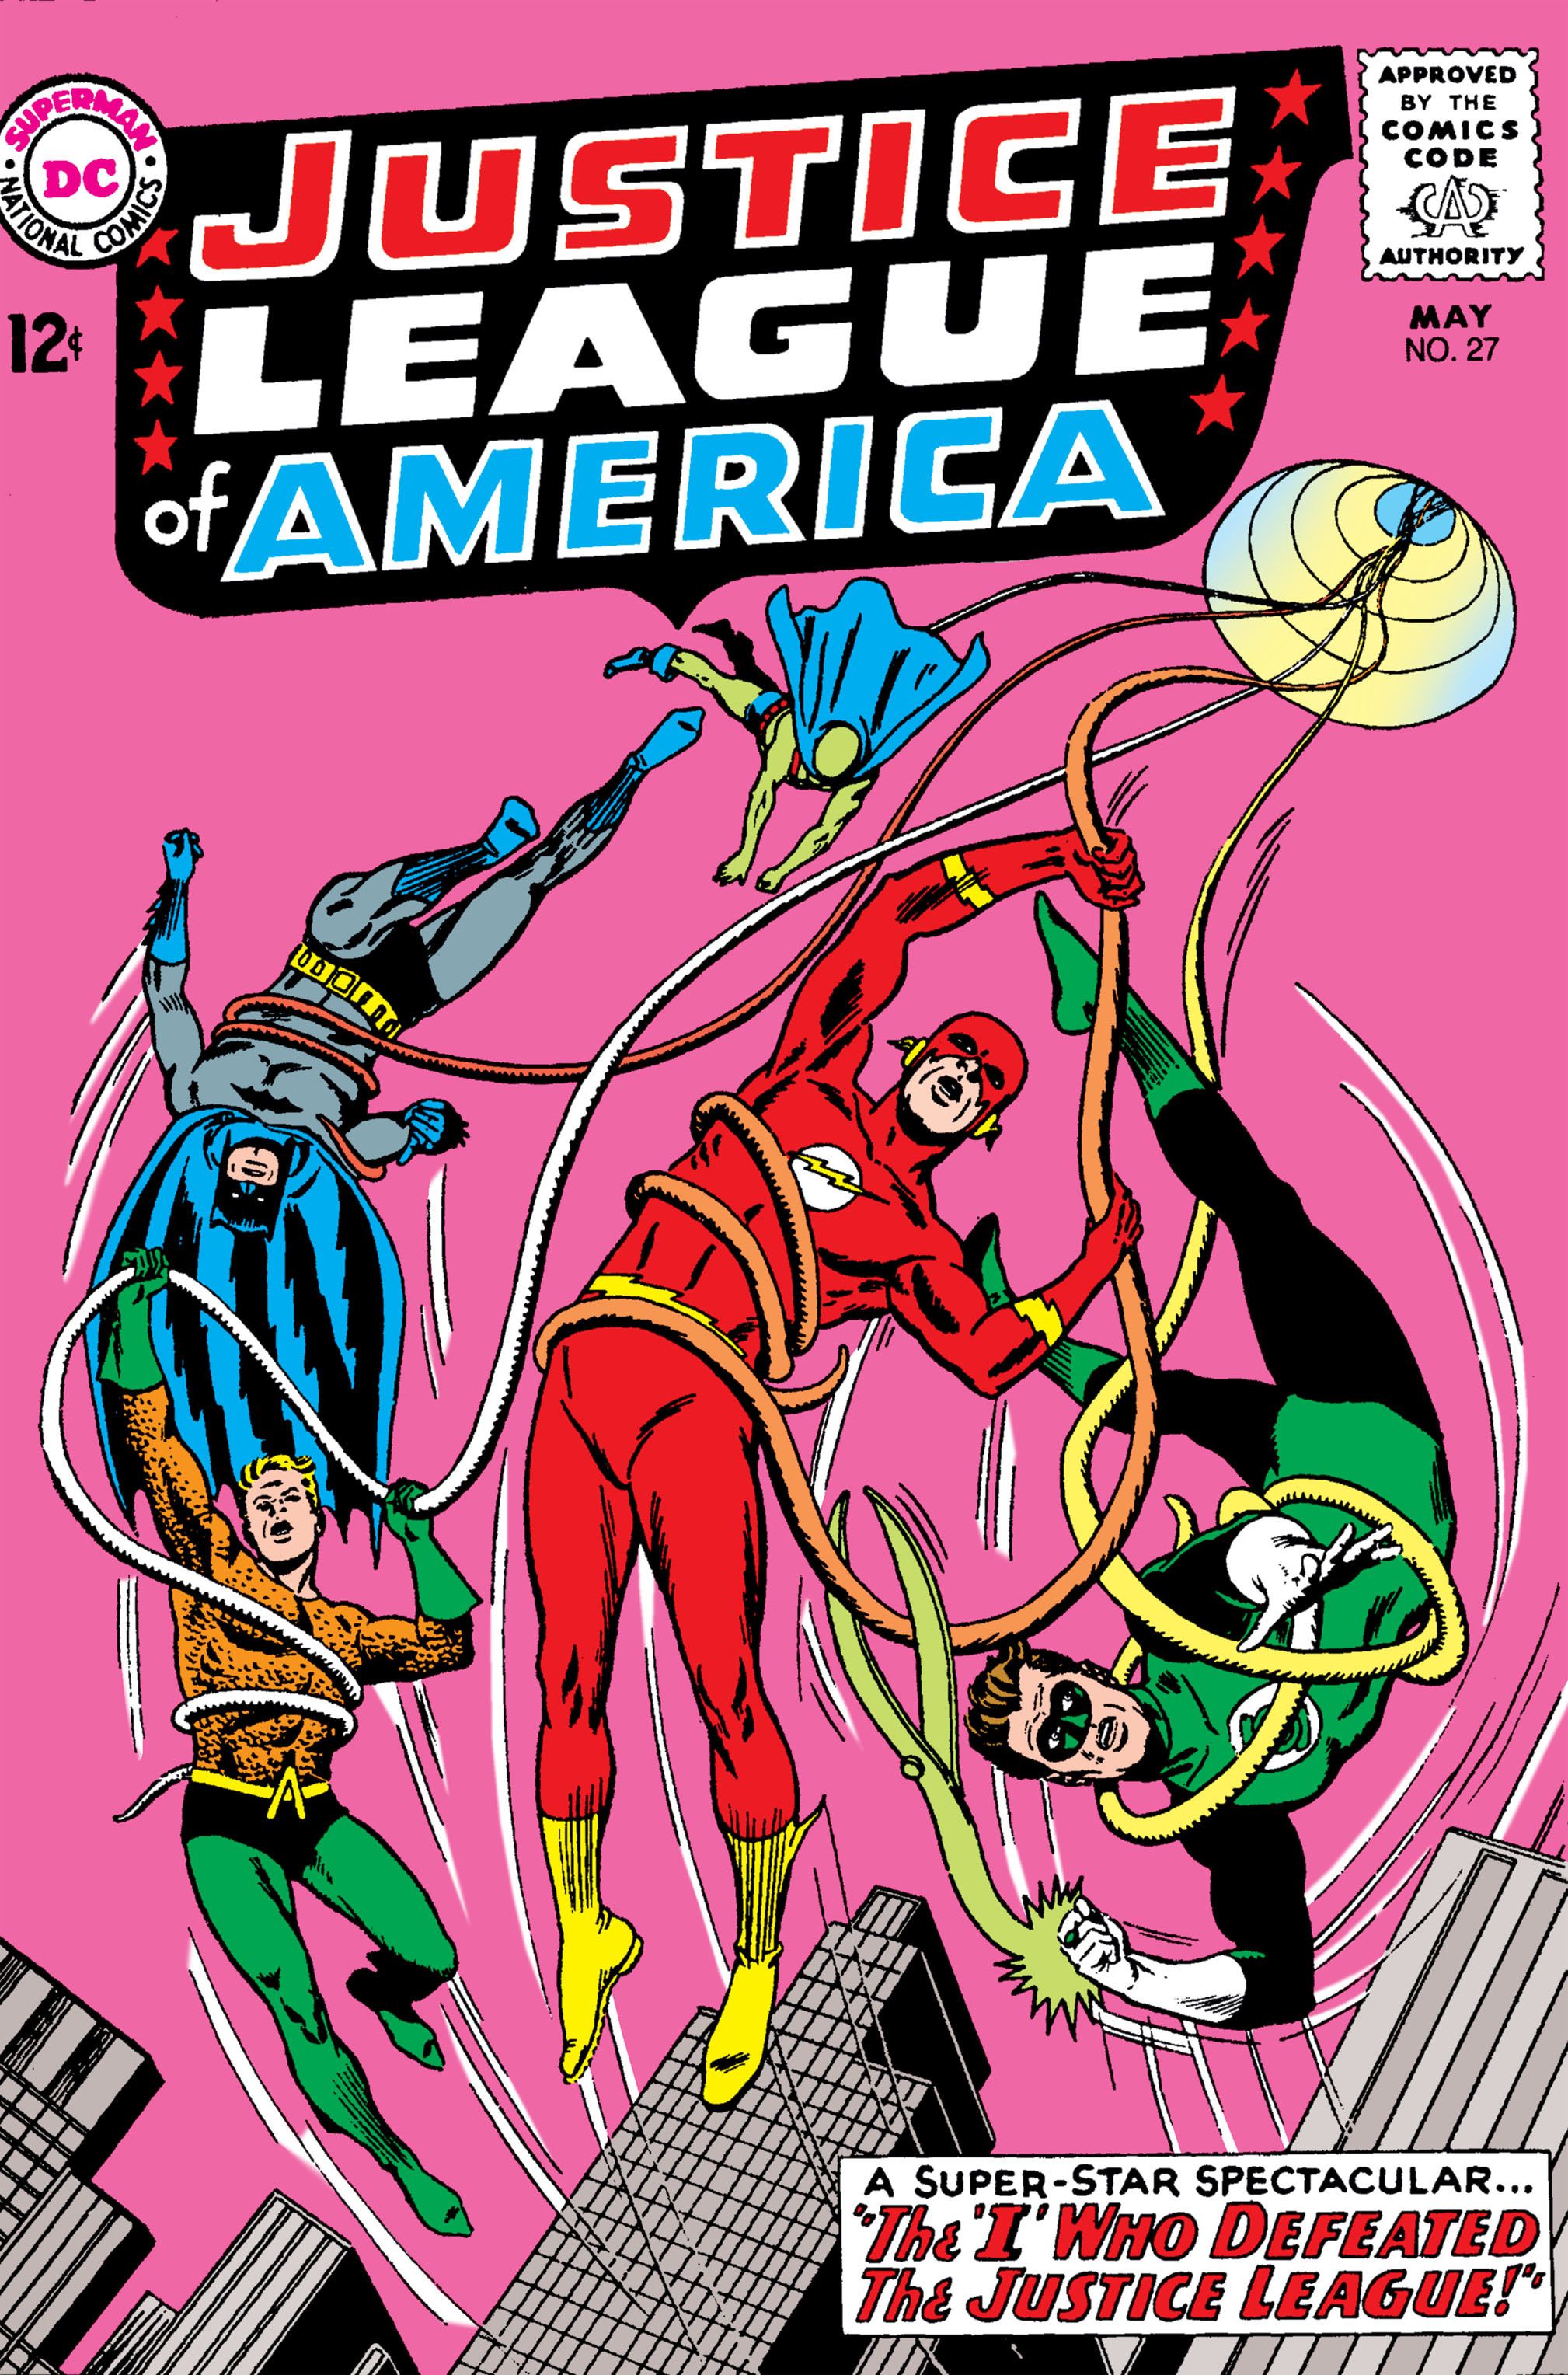 The cover of Justice League of America #27